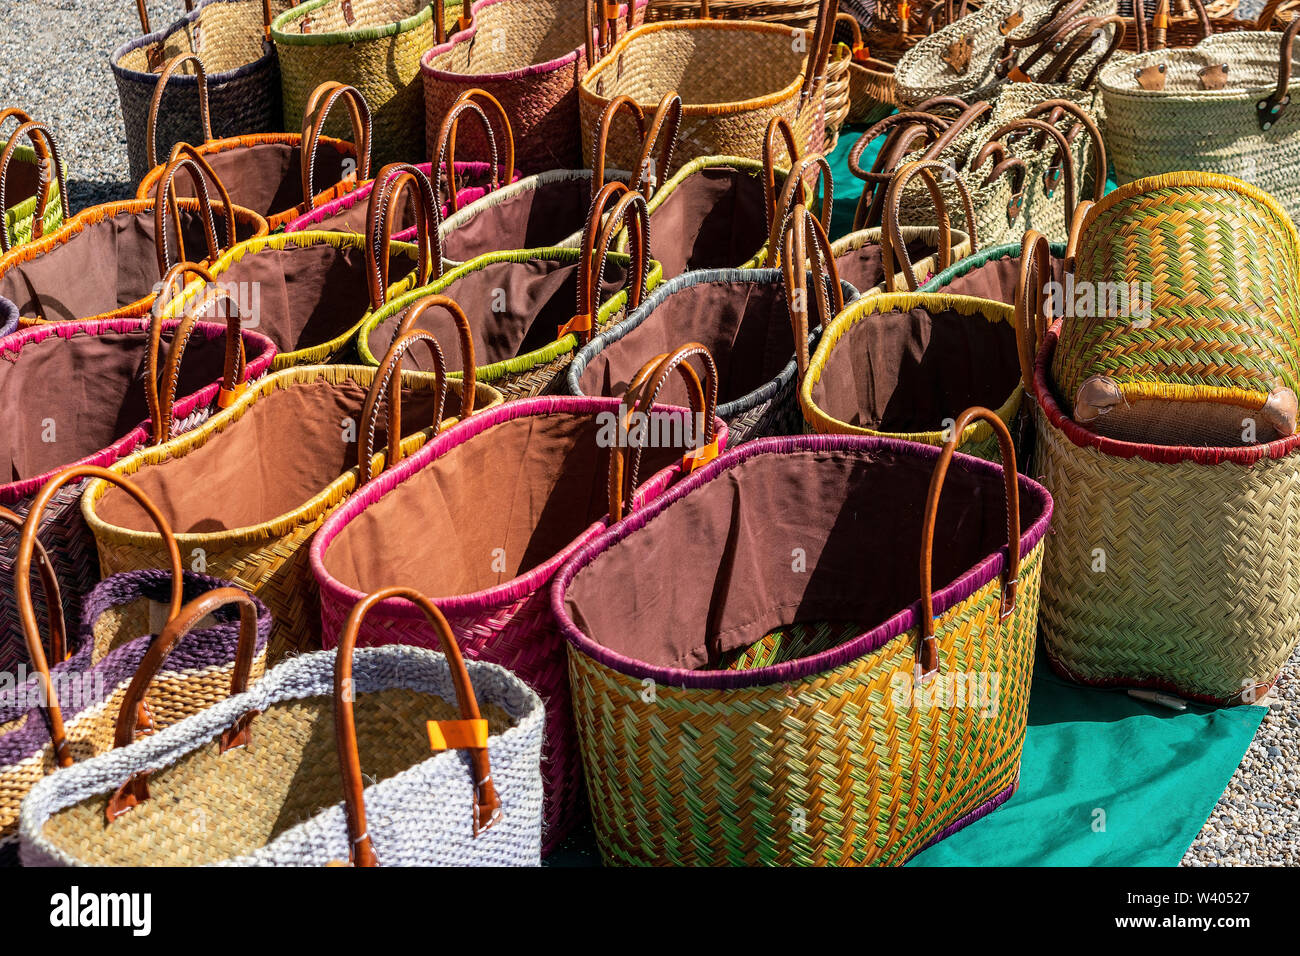 A display of colourful handmade wicker baskets for sale in a French market suitable for carrying shopping Stock Photo